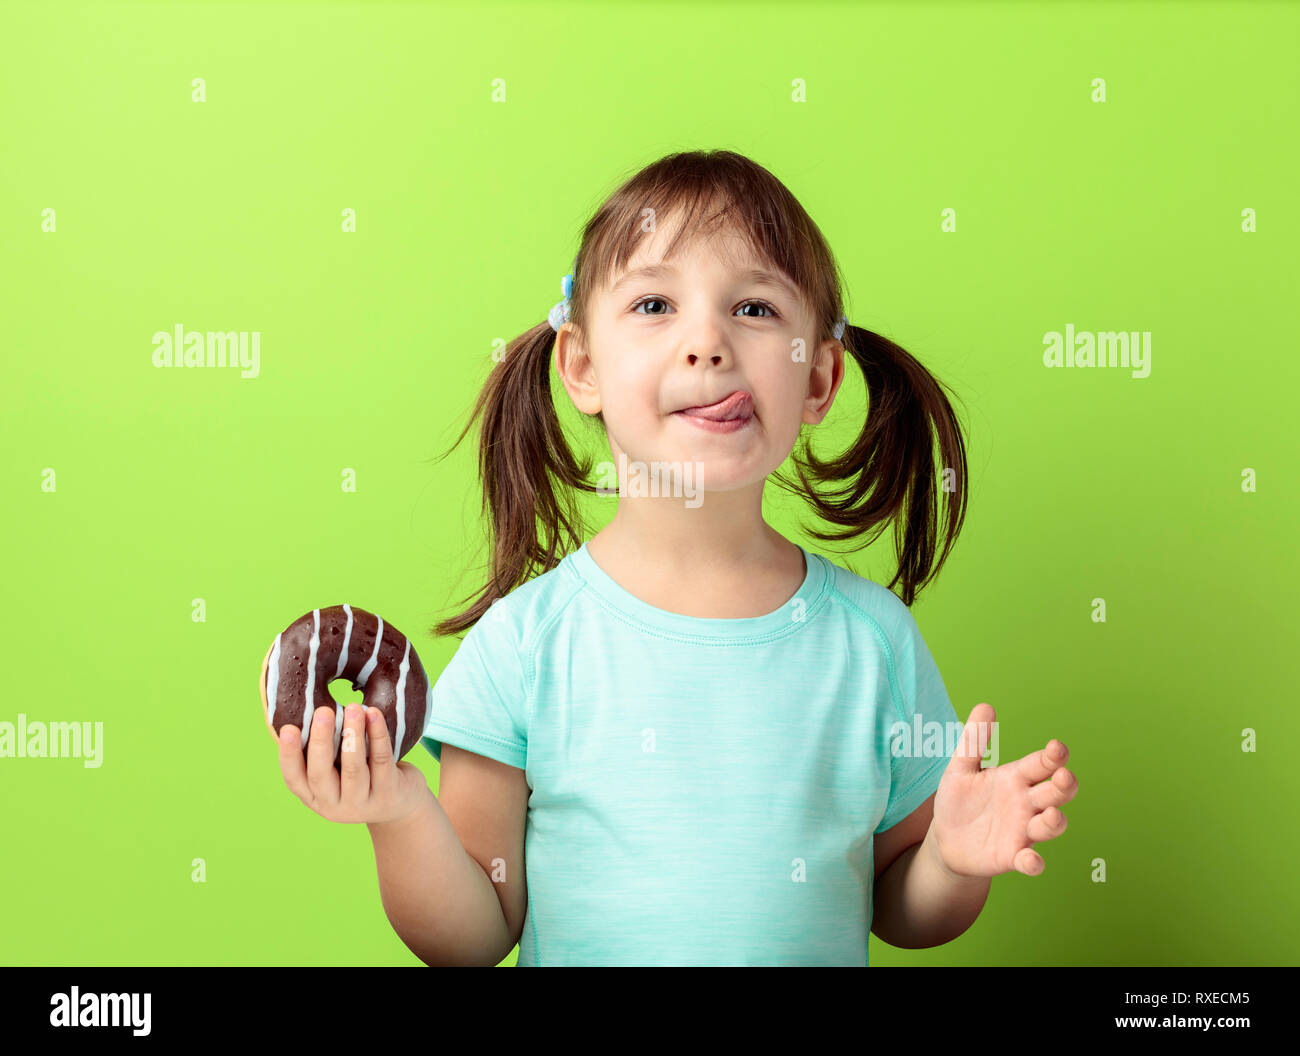 Four-year-old girl in a turquoise t-shirt eat donut. The girl's hair is tied in tails. green background. Stock Photo